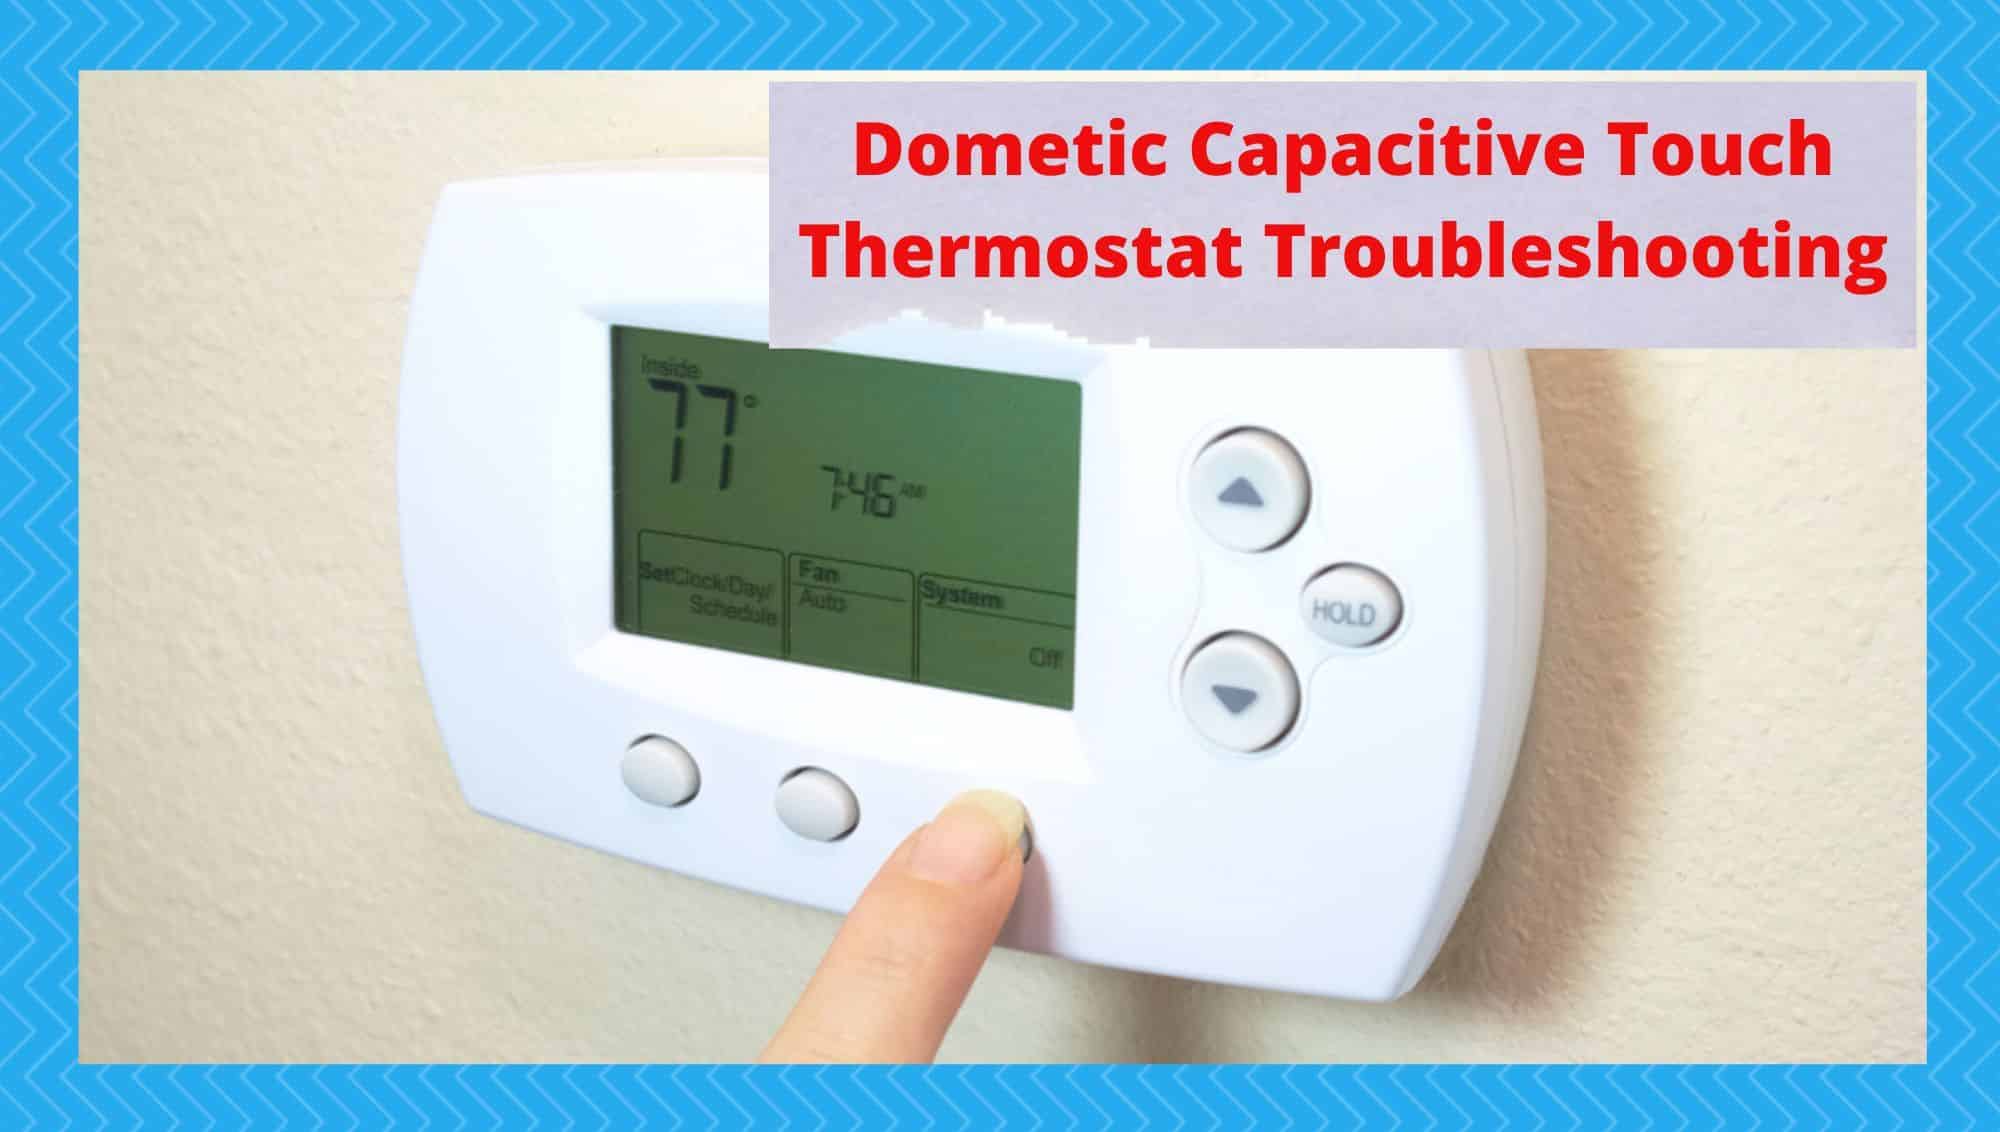 dometic capacitive touch thermostat troubleshooting